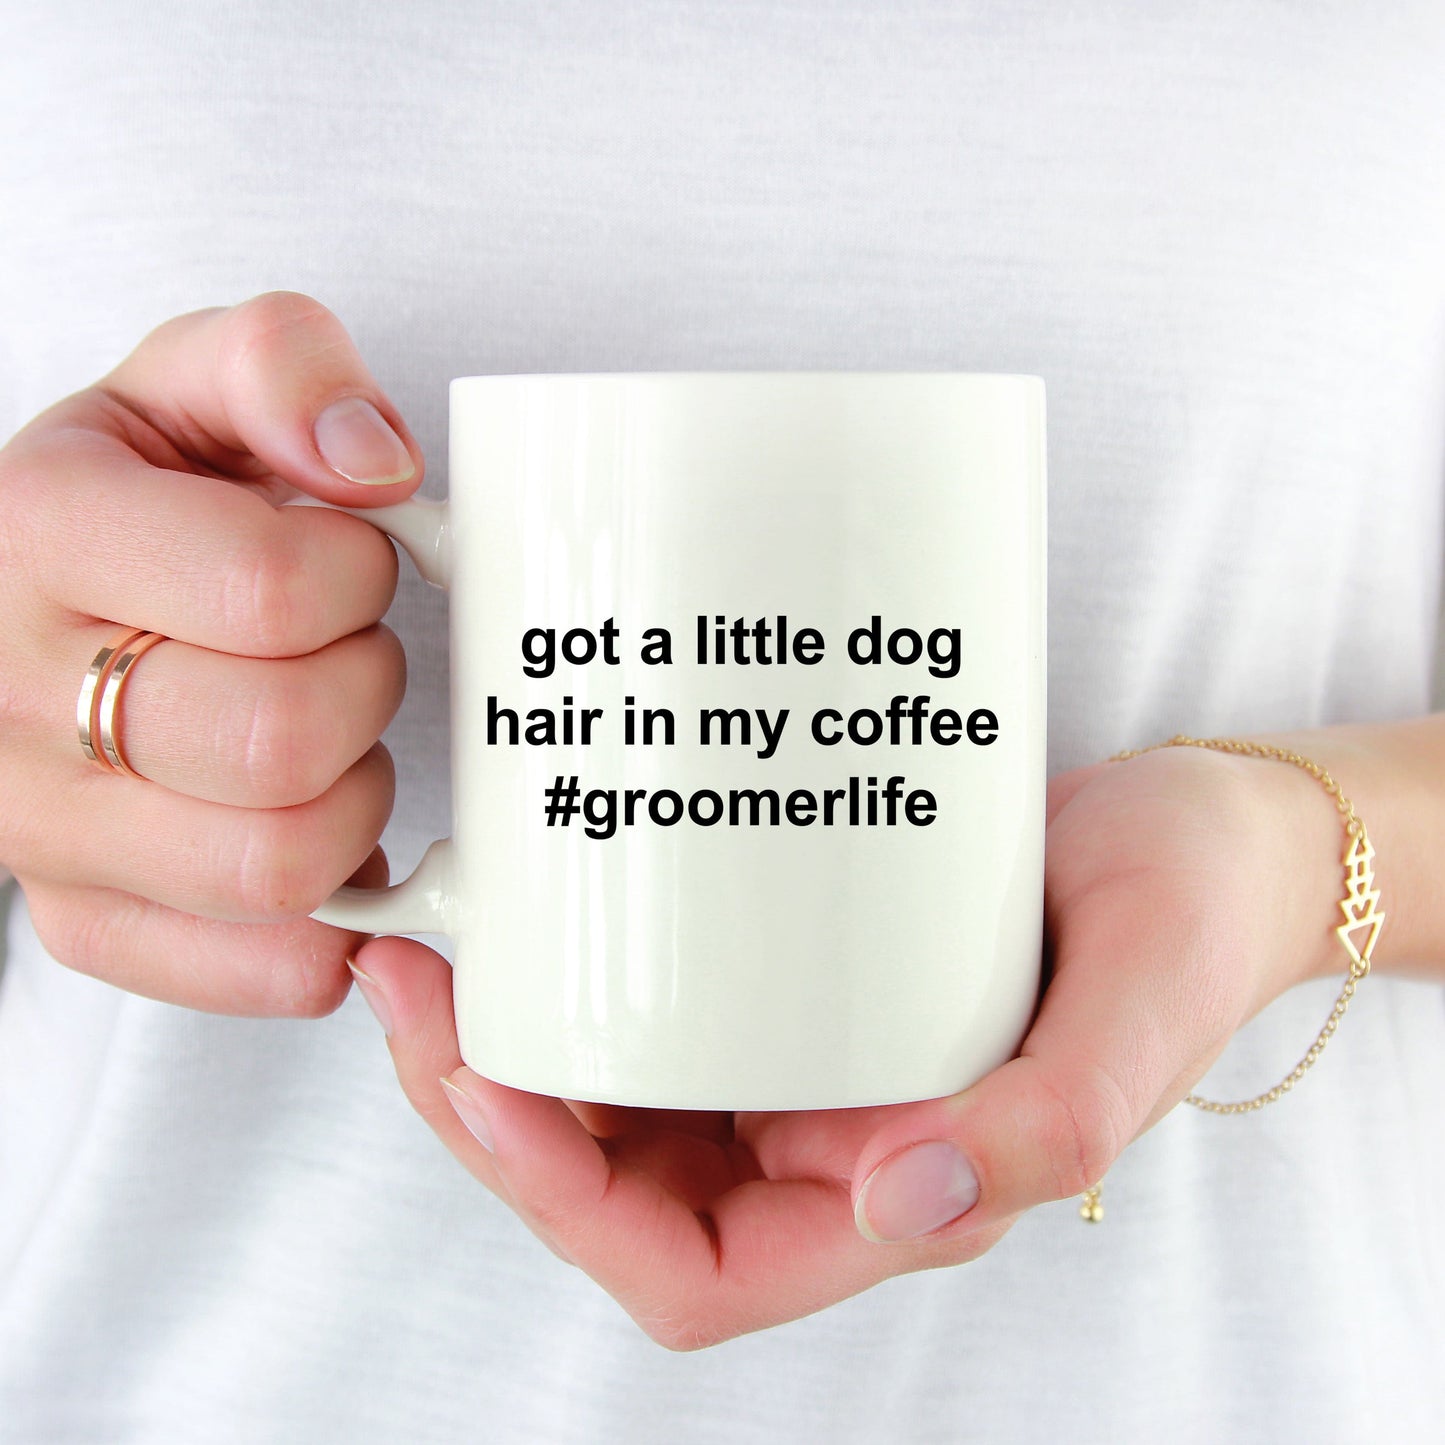 Got A Little Dog Hair in My Coffee - Groomerlife - Makes the Perfect Gift for a Dog Groomer